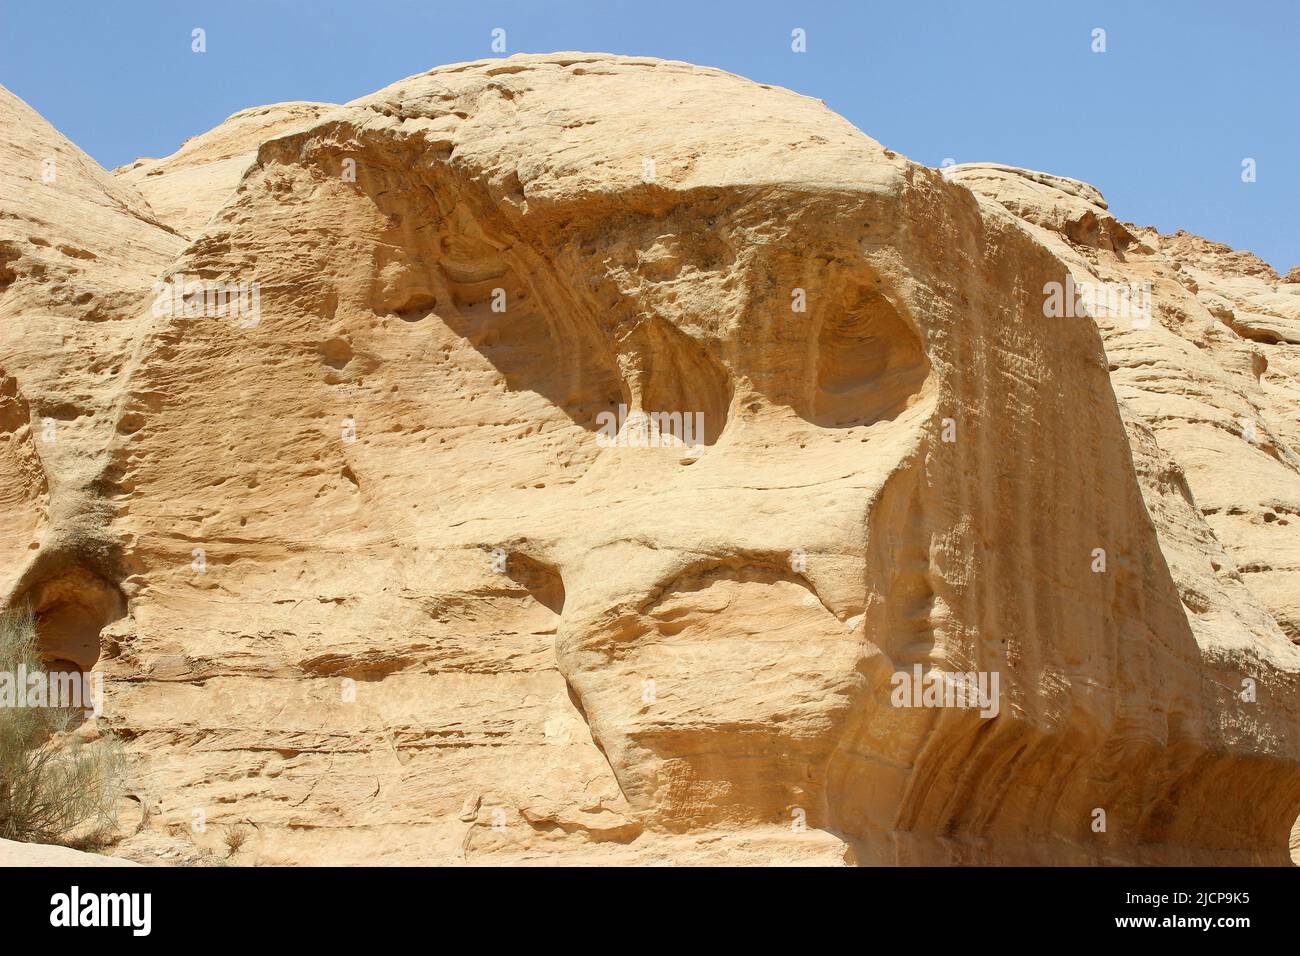 Weathered Sandstone Rock In The Shape of A Skull, Petra Jordan Stock Photo